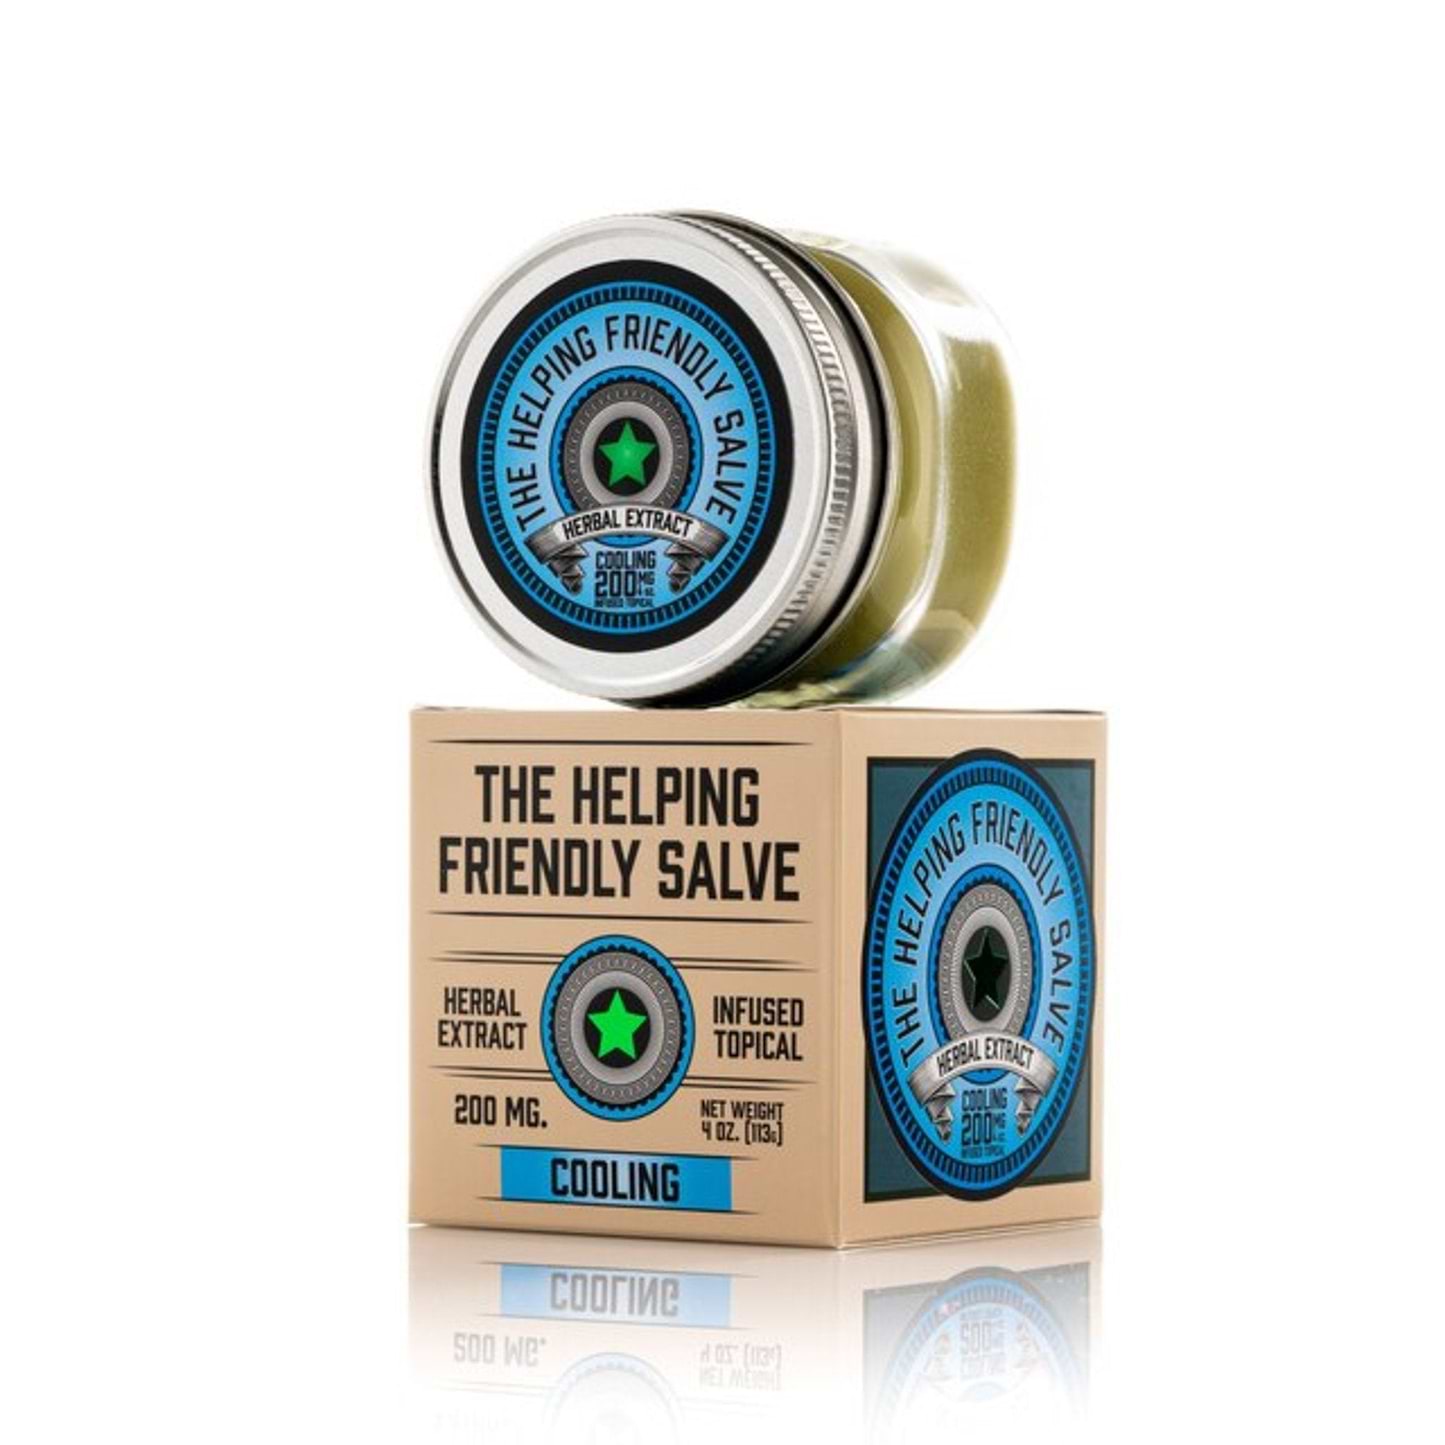 The Helping Friendly Herbal Extract Topical - 200mg 200mg / Cooling